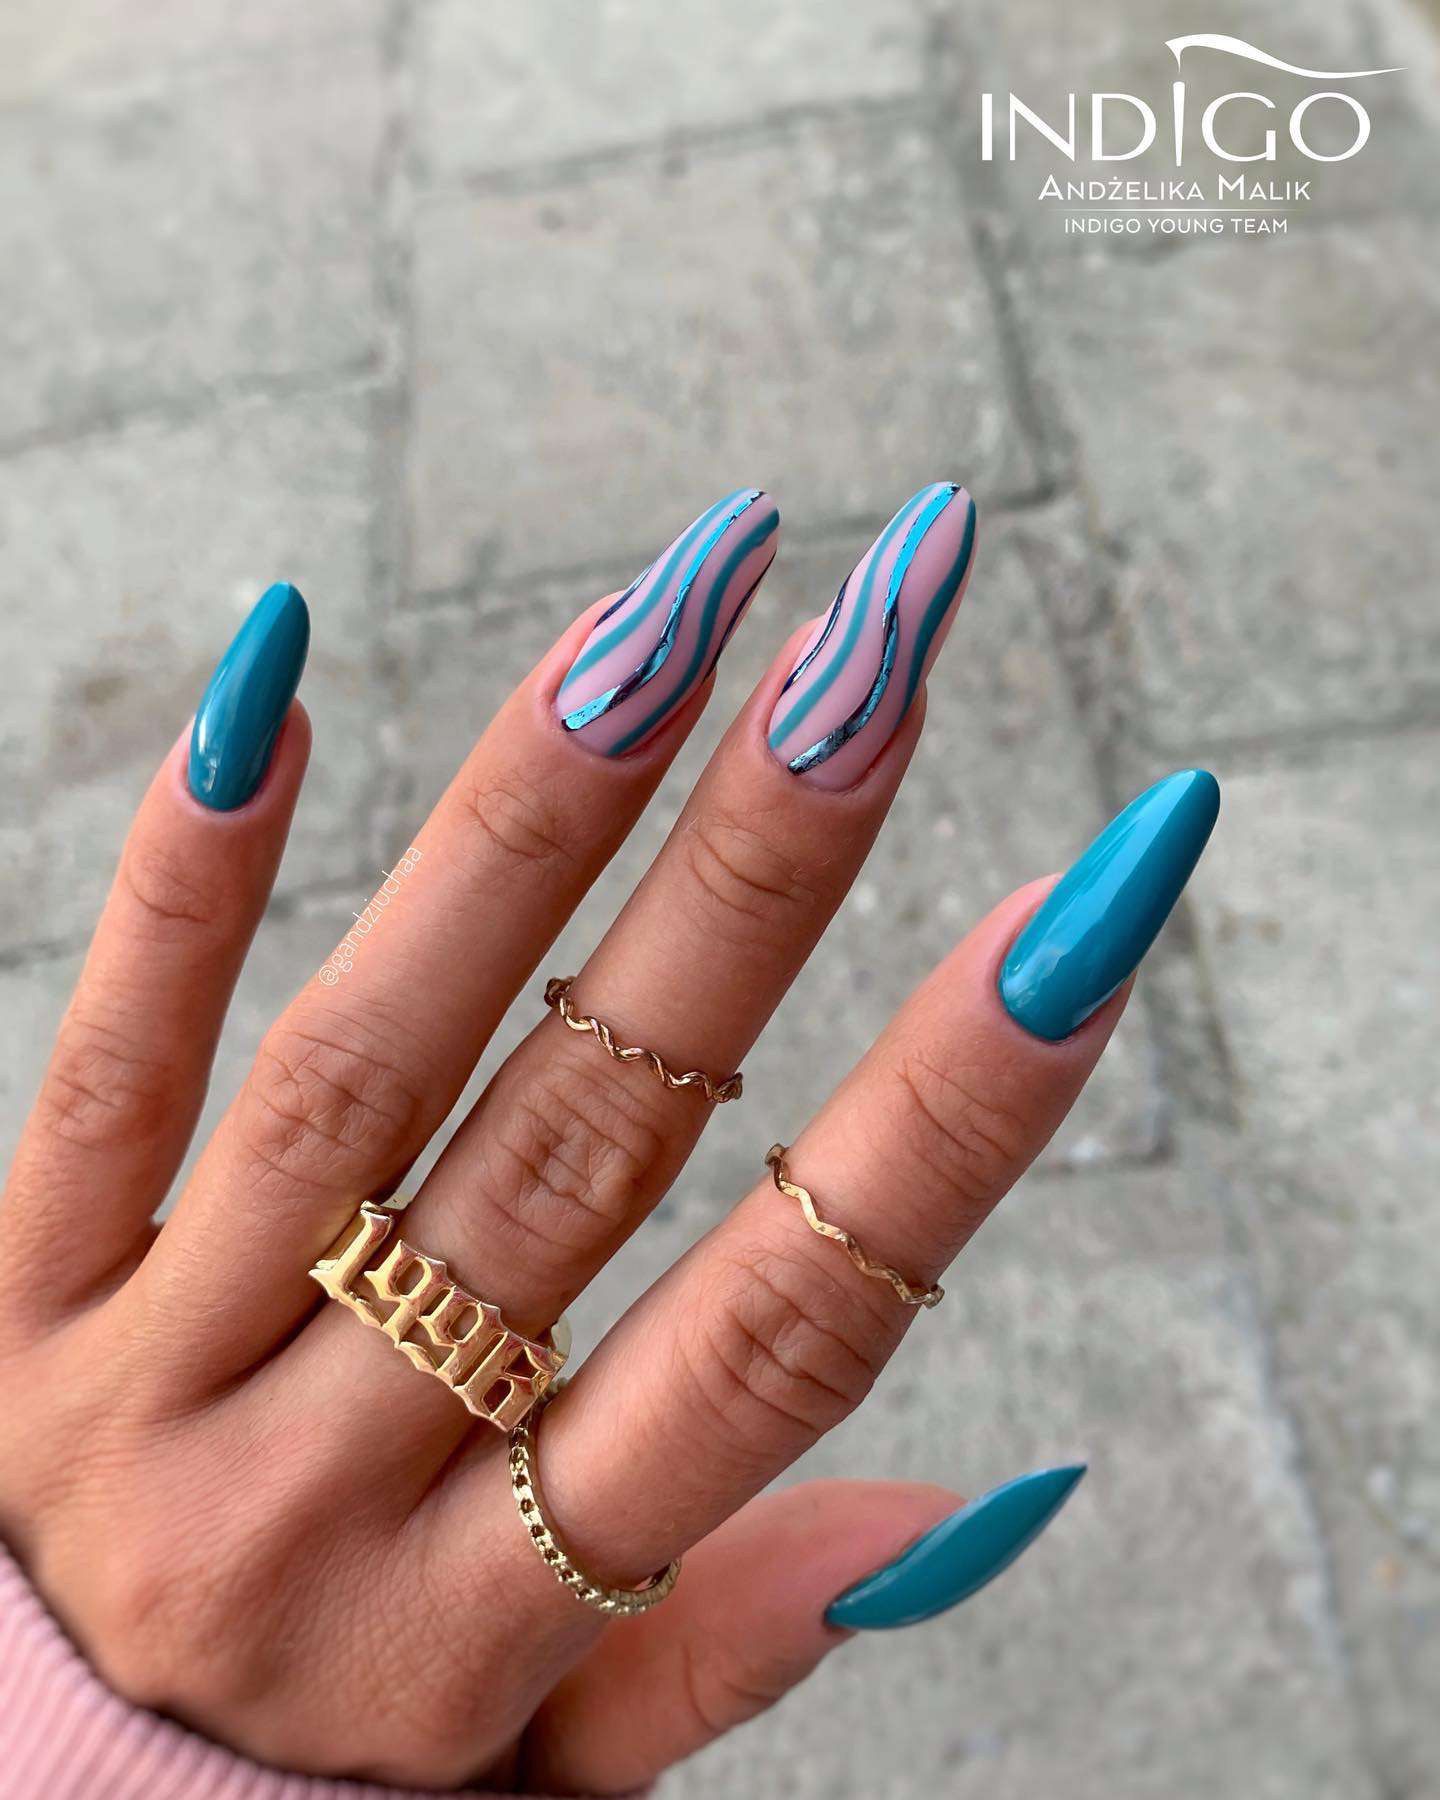 35 Nail Designs For 2022 You’ll Want To Try Immediately images 4